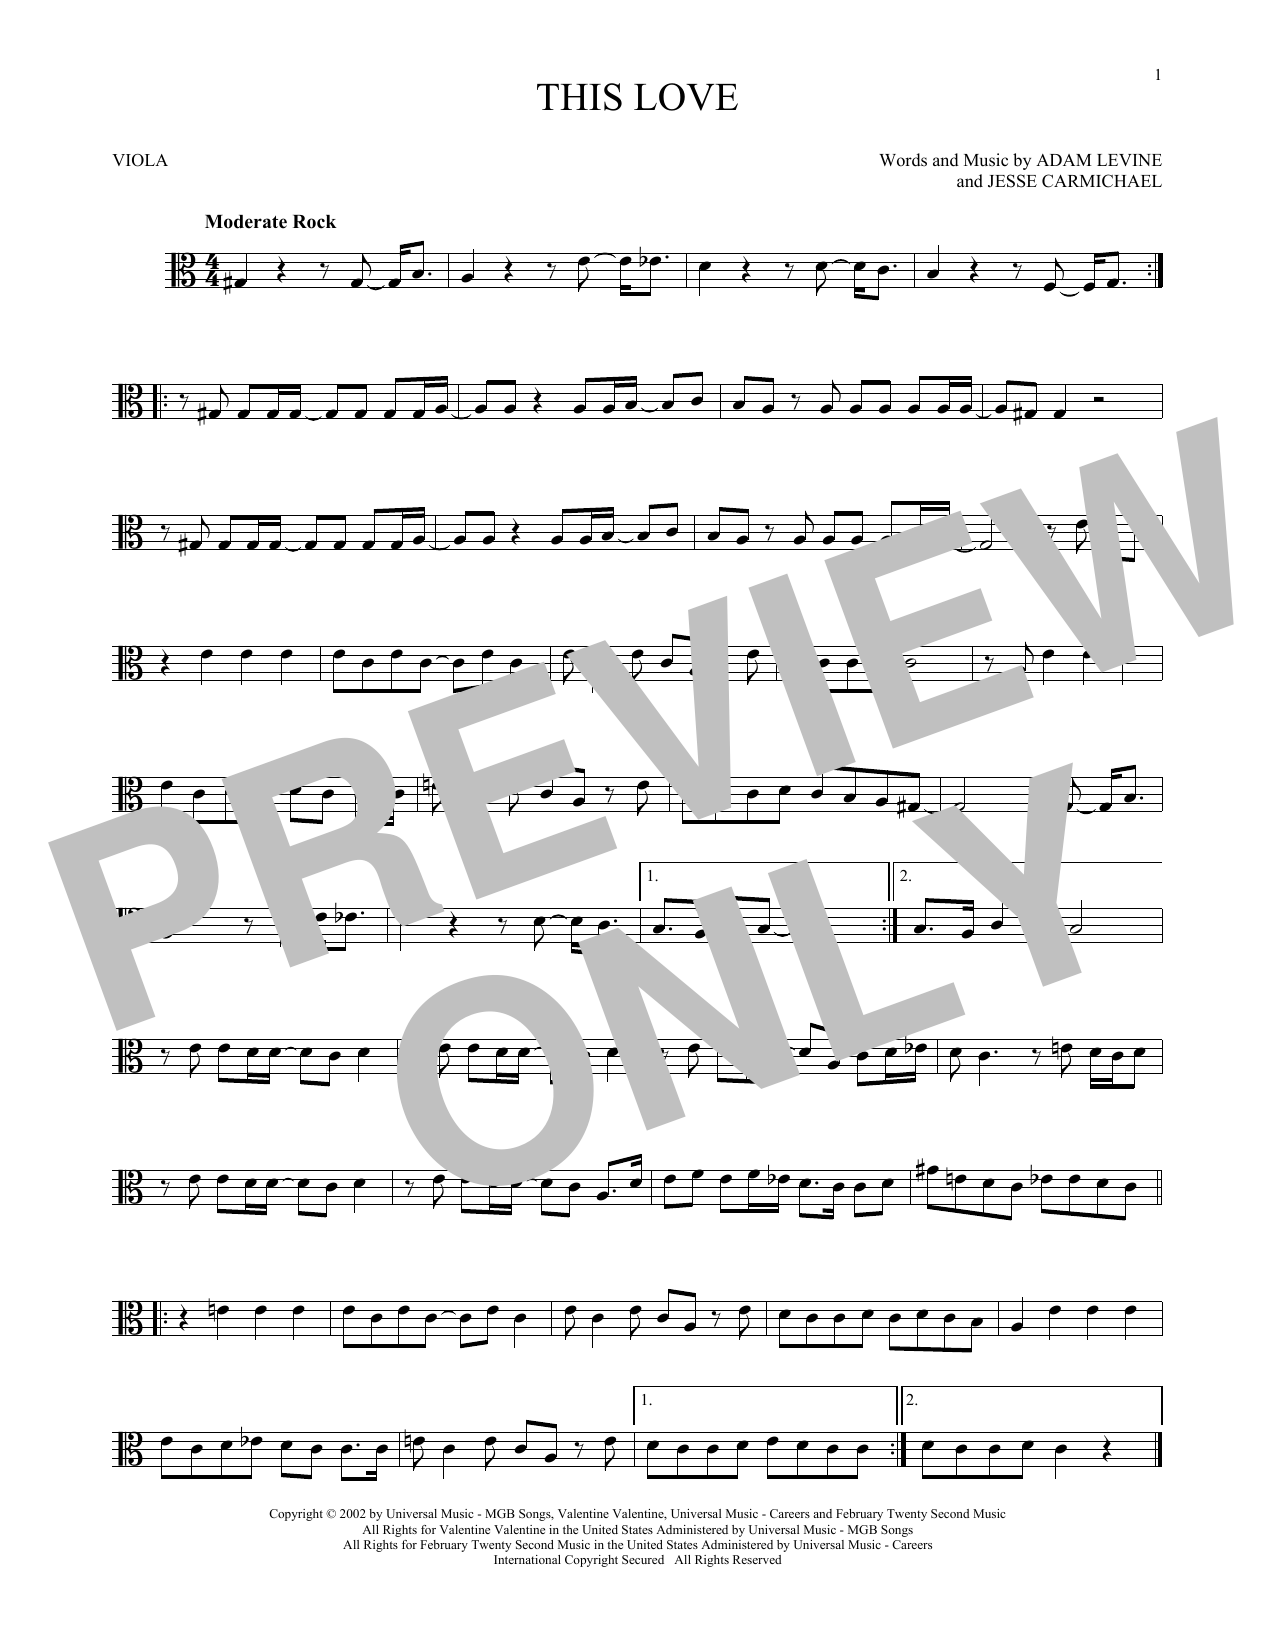 Download Maroon 5 This Love Sheet Music